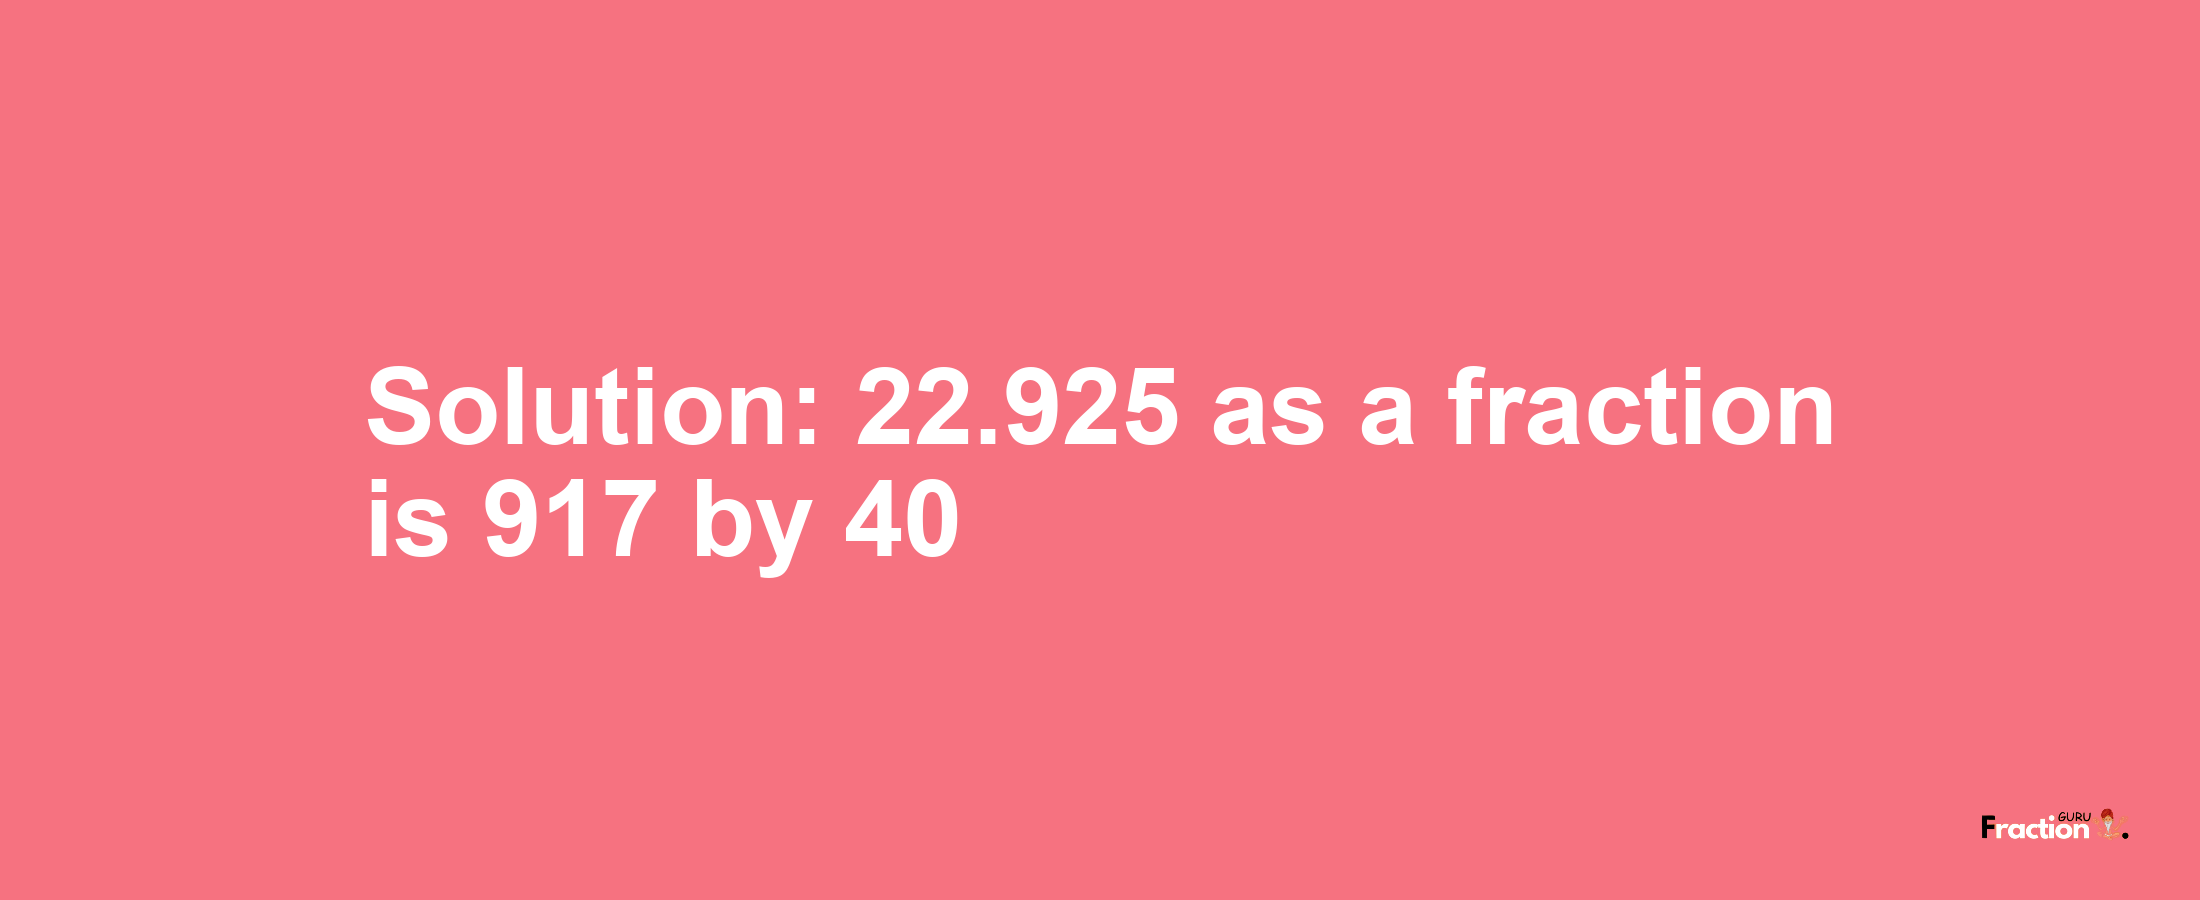 Solution:22.925 as a fraction is 917/40